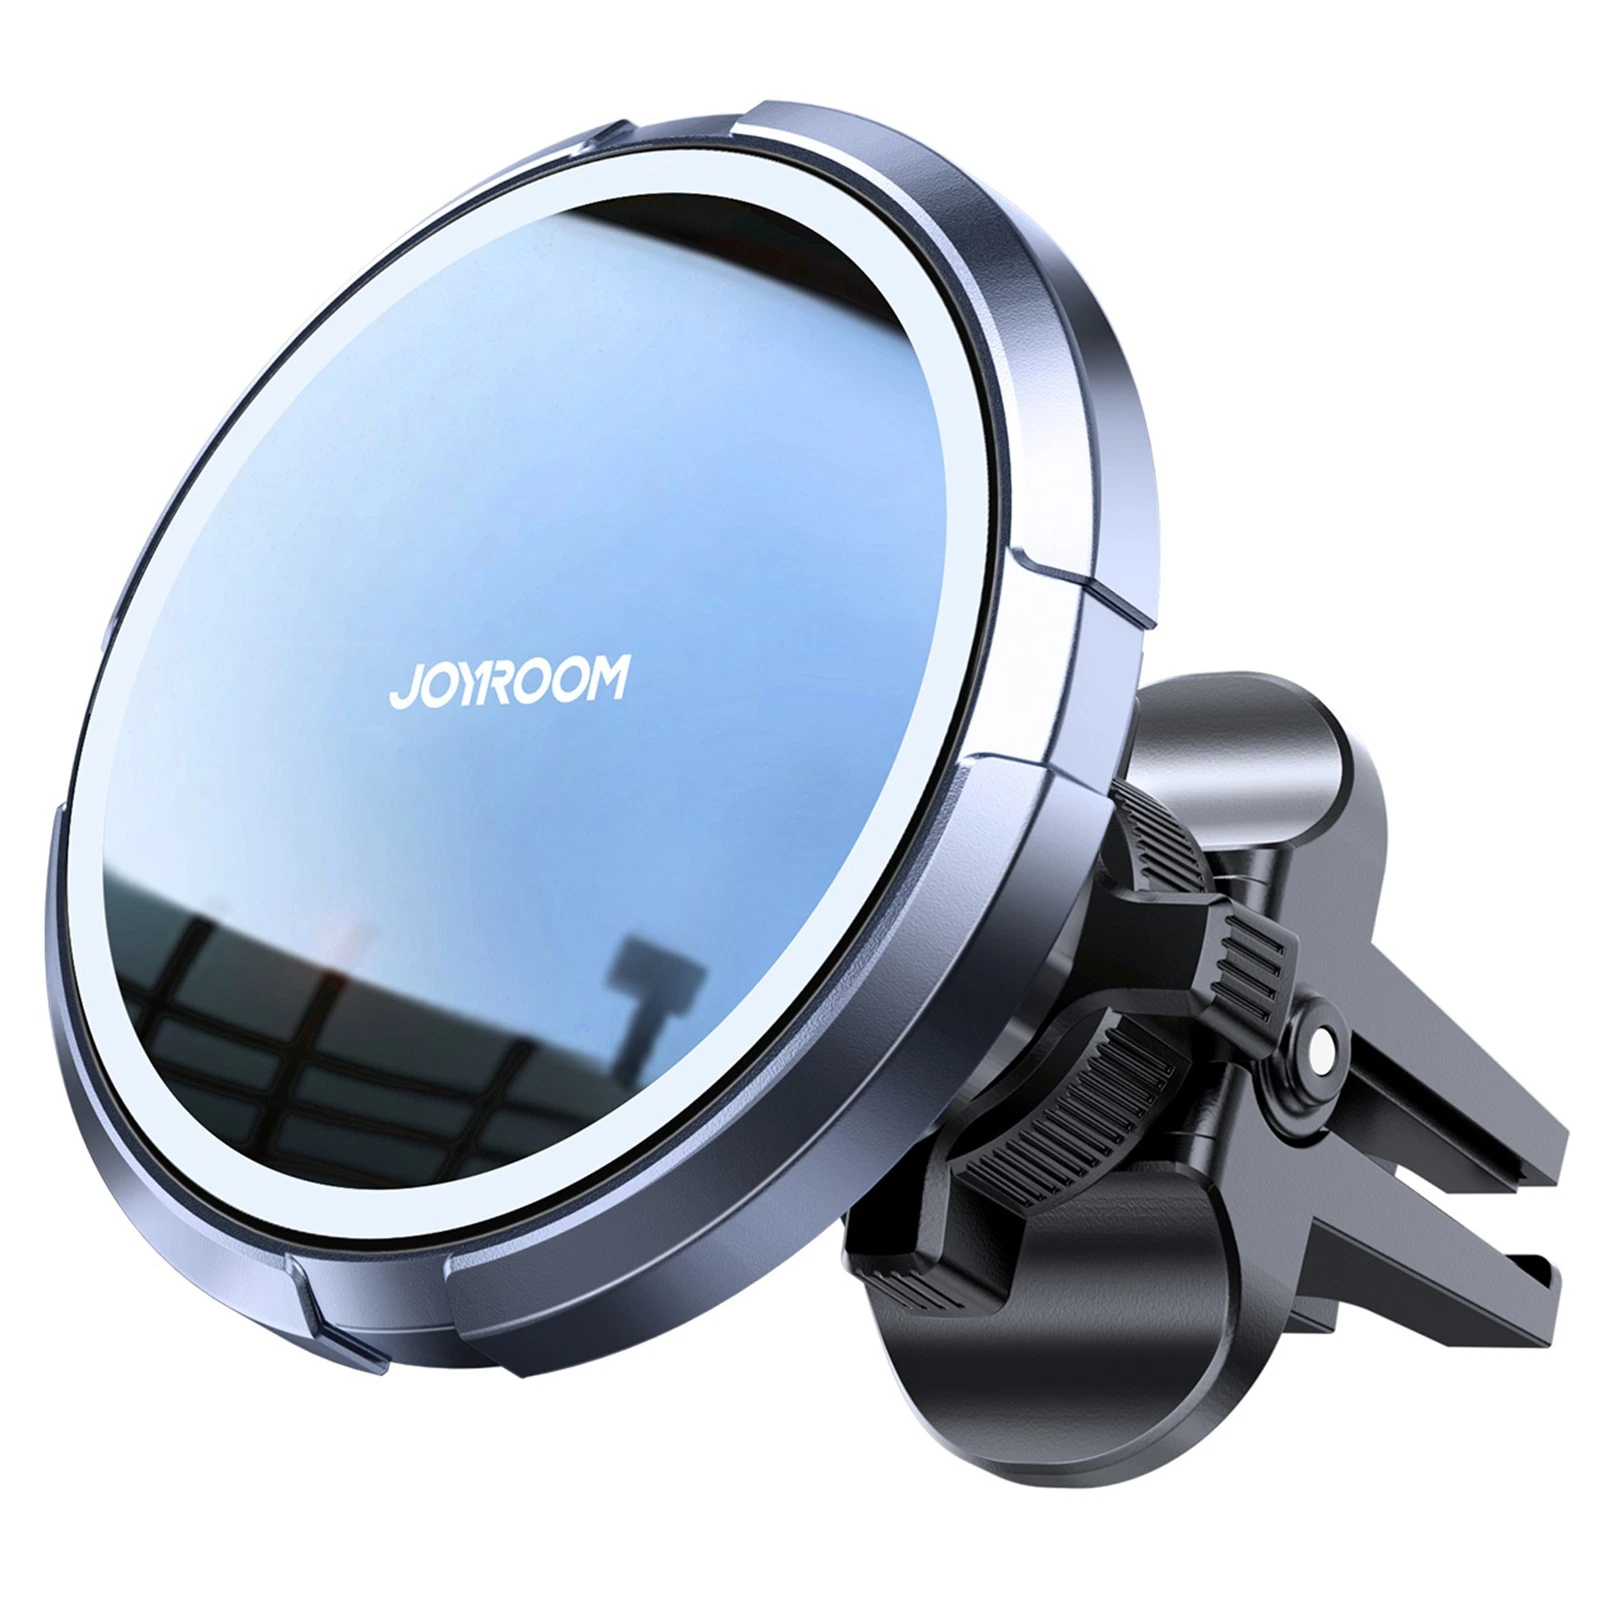 Joyroom Jr-Zs313 Magnetic Bracket Car Mount Phone Holder Air Vent Phone Stand Support 360-Degree Rotating for iPhone 12-14 Series